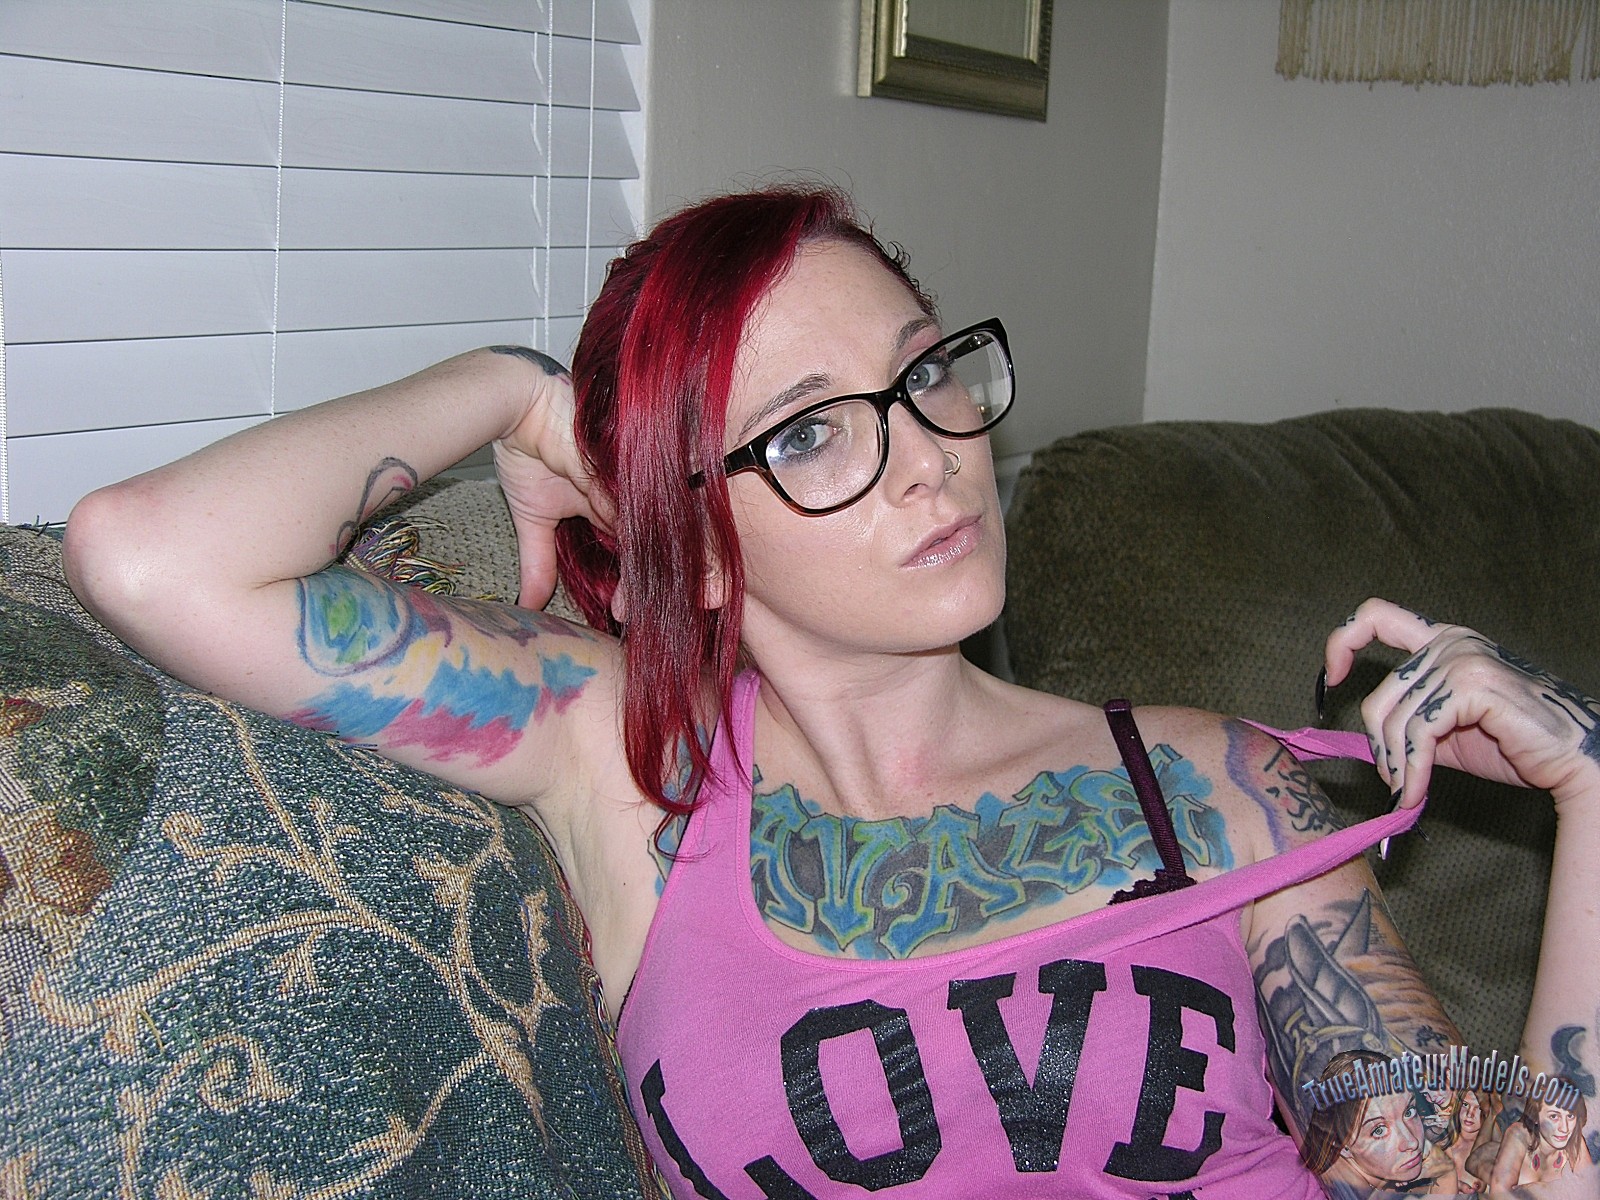 Punk Porn Models - Punk Girls With Glasses Porn | Sex Pictures Pass